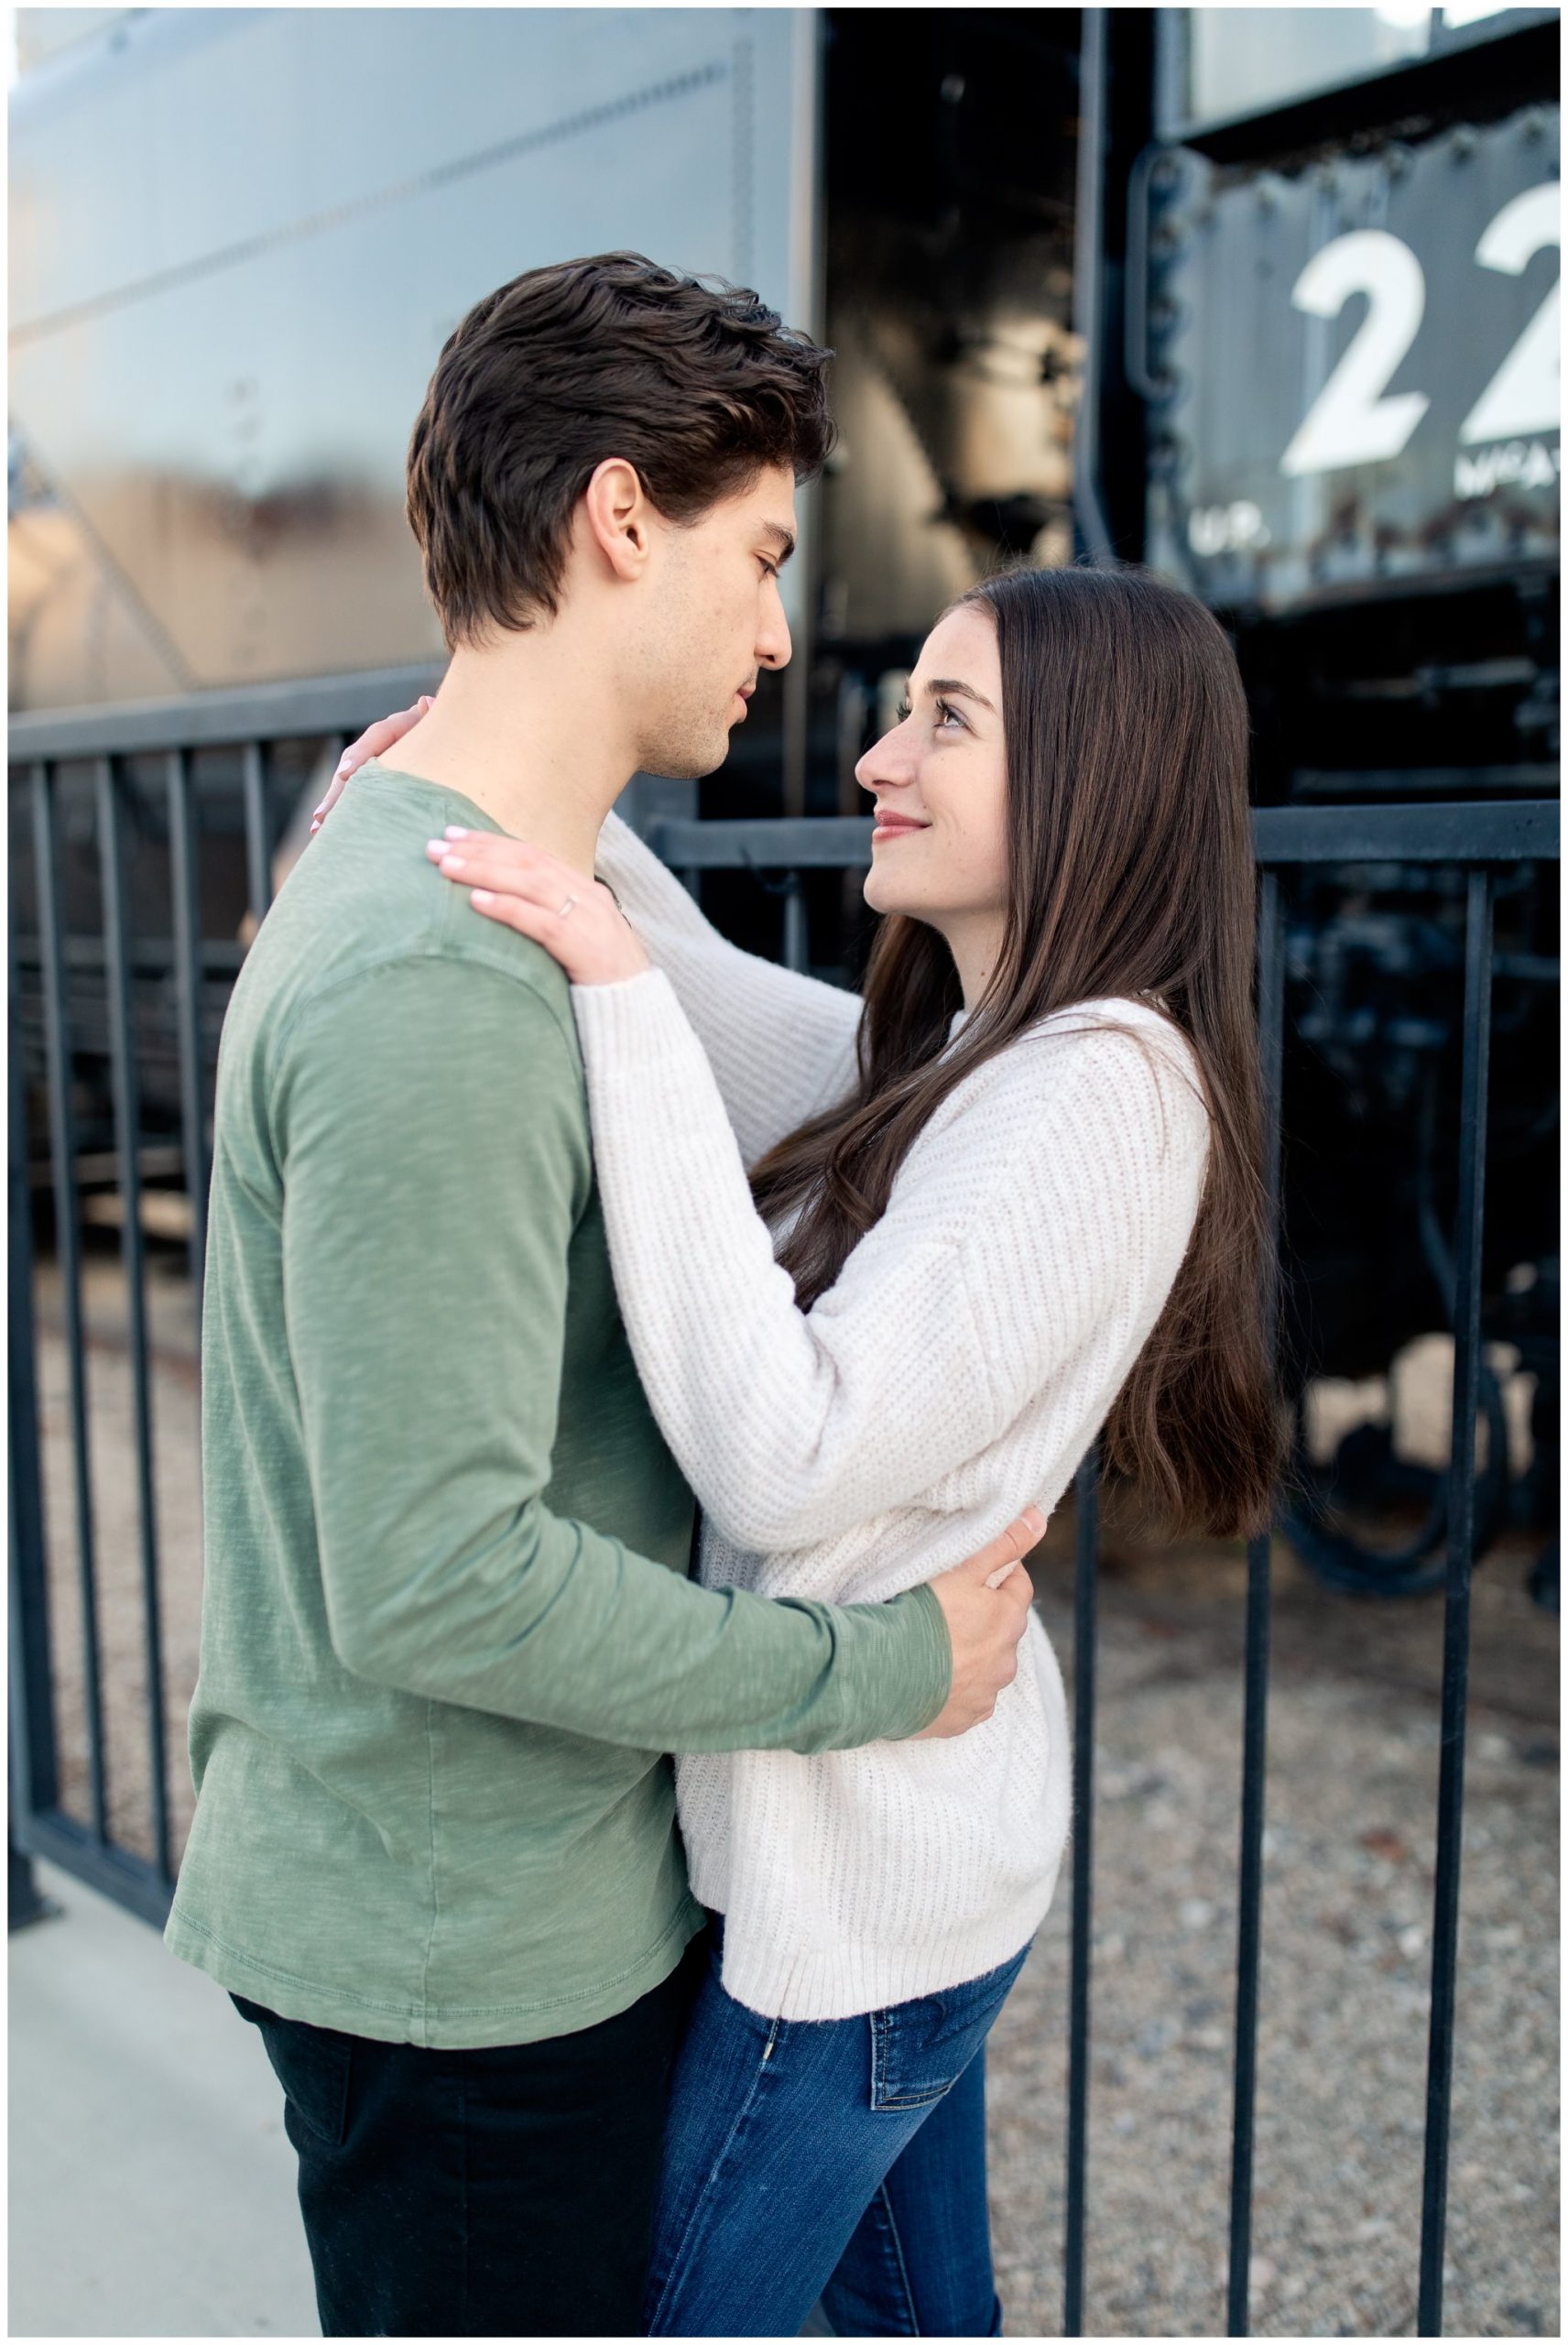 Winter Engagement photos near the black train at the Boise train depot.